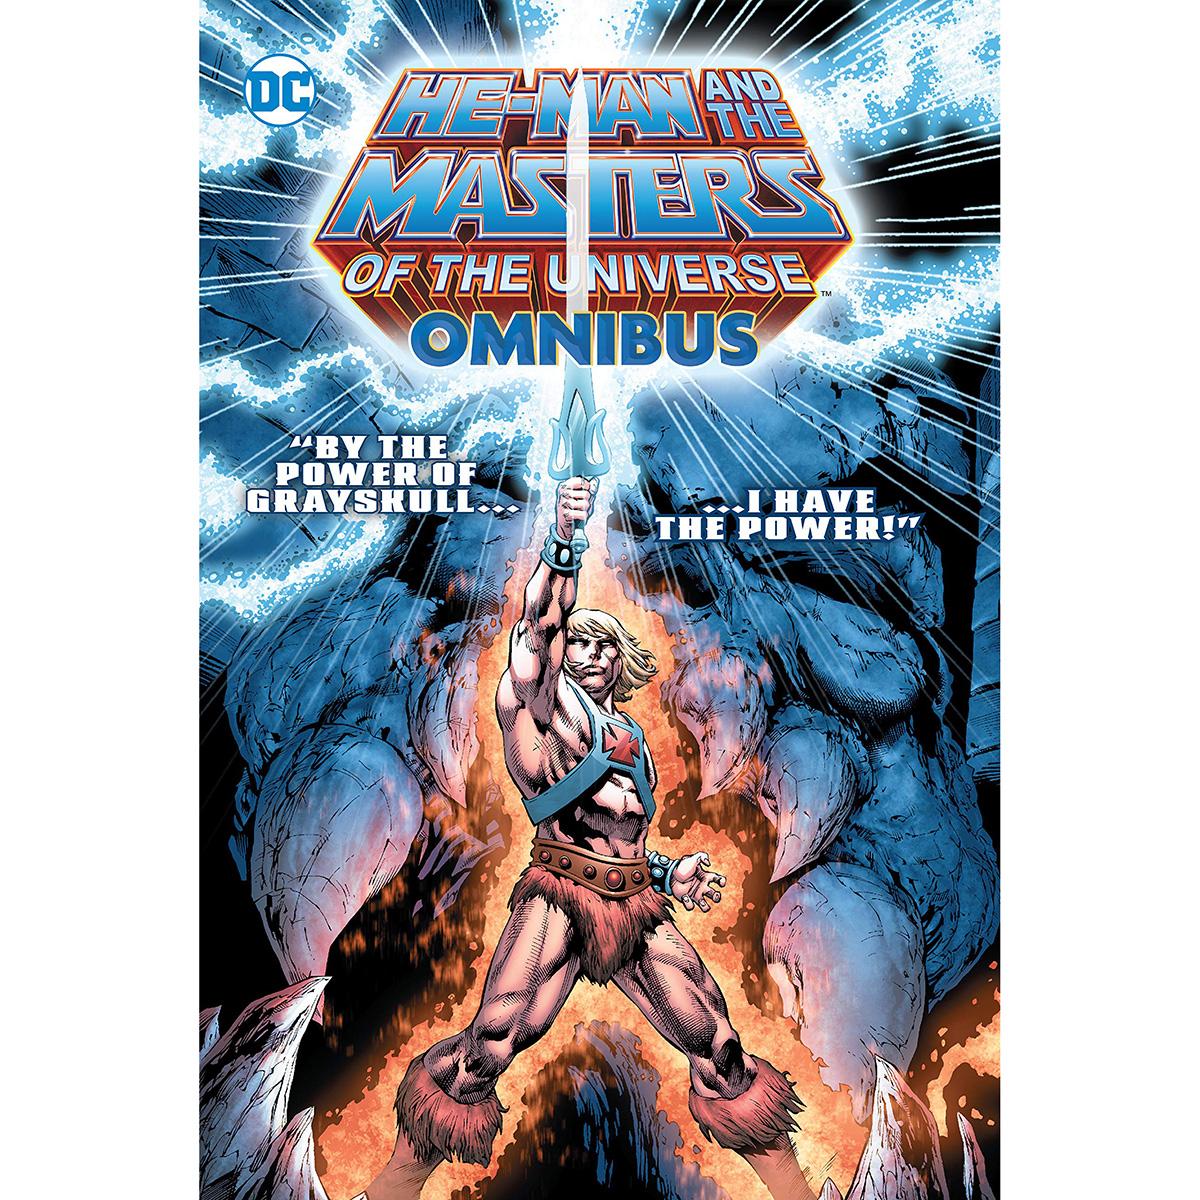 He-Man and the Masters of the Universe Omnibus Hardcover Book for $59.48 Shipped